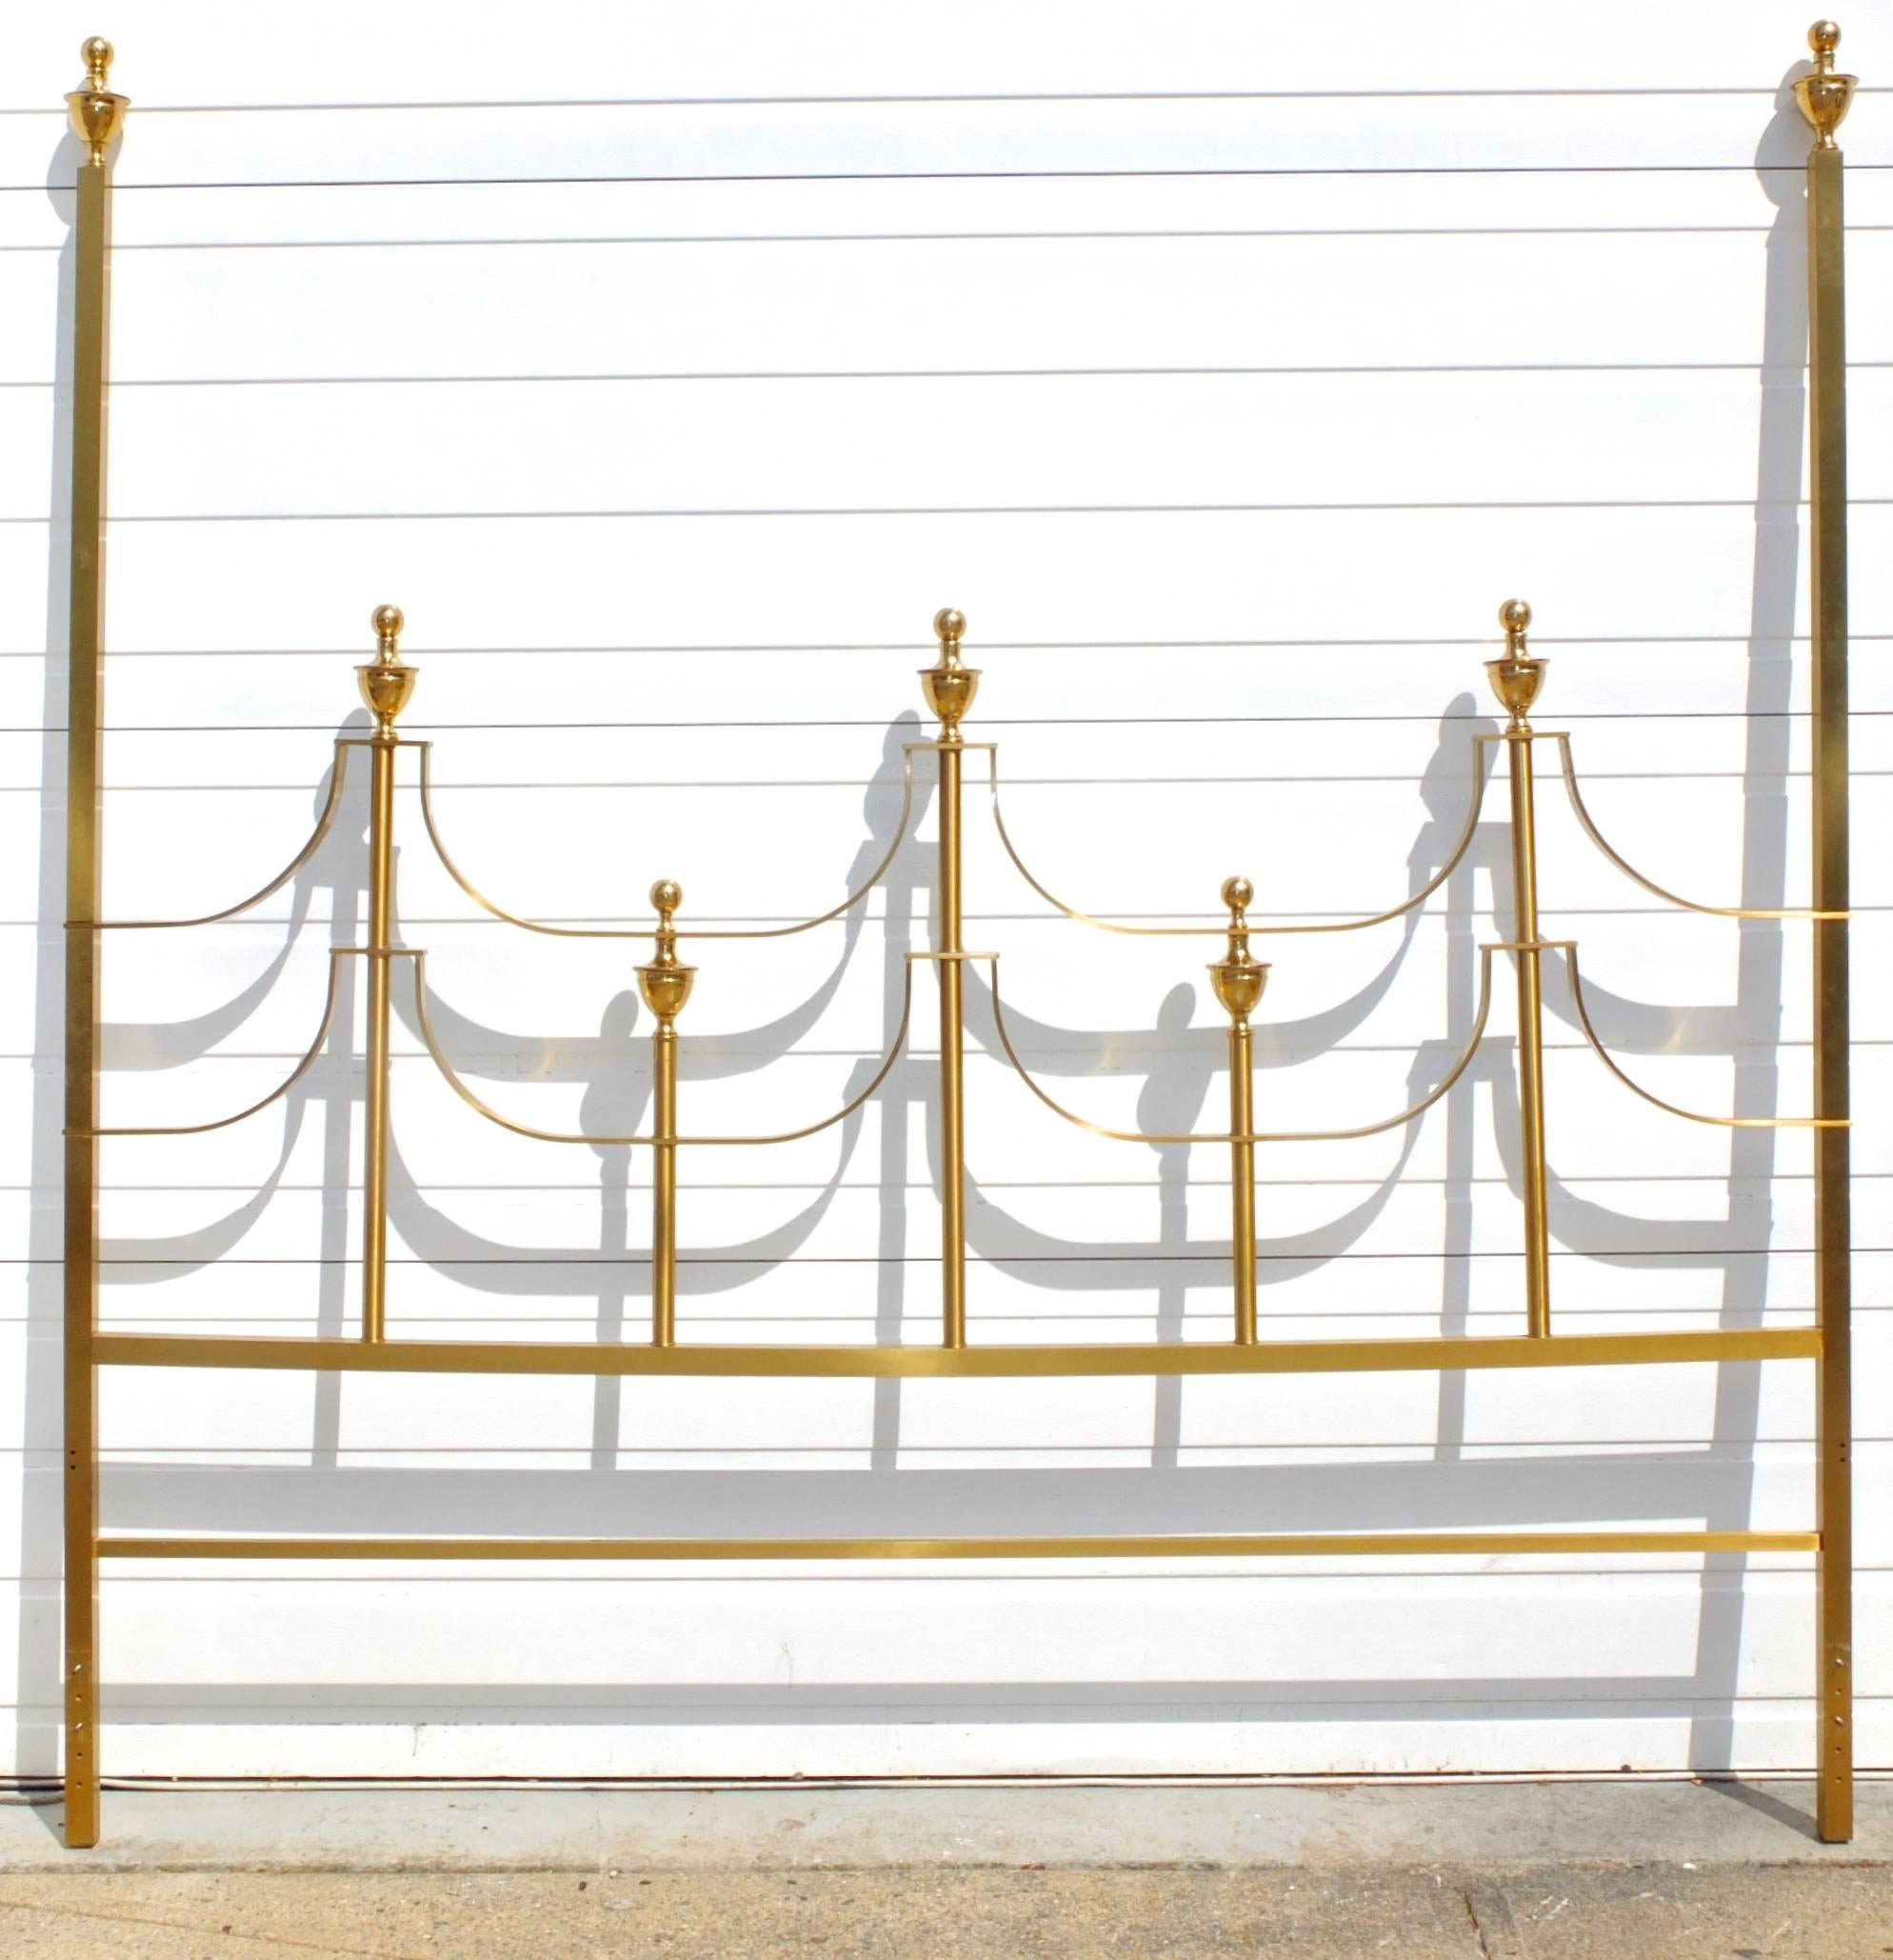 Mastercraft style brass finish headboard. King-size. Satin finish with shiny brass urn finials. You will note that this version has seven of the brass capped urn finials.

Often incorrectly attributed to Mastercraft, this was actually produced by